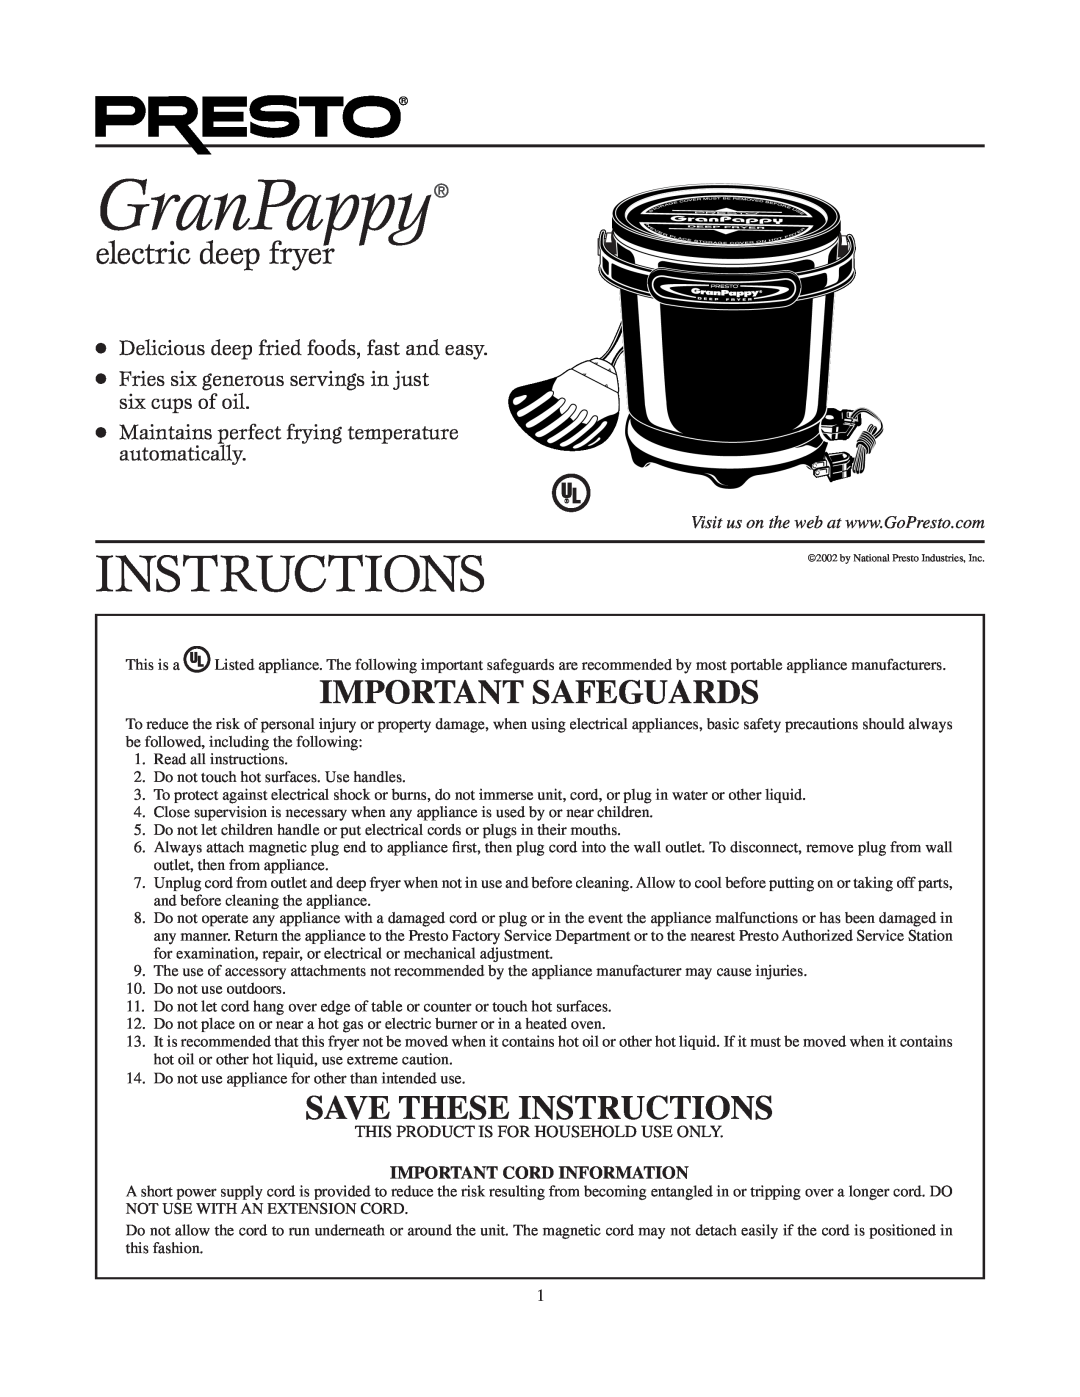 Presto GranPappy manual Important Safeguards, Save These Instructions, electric deep fryer 